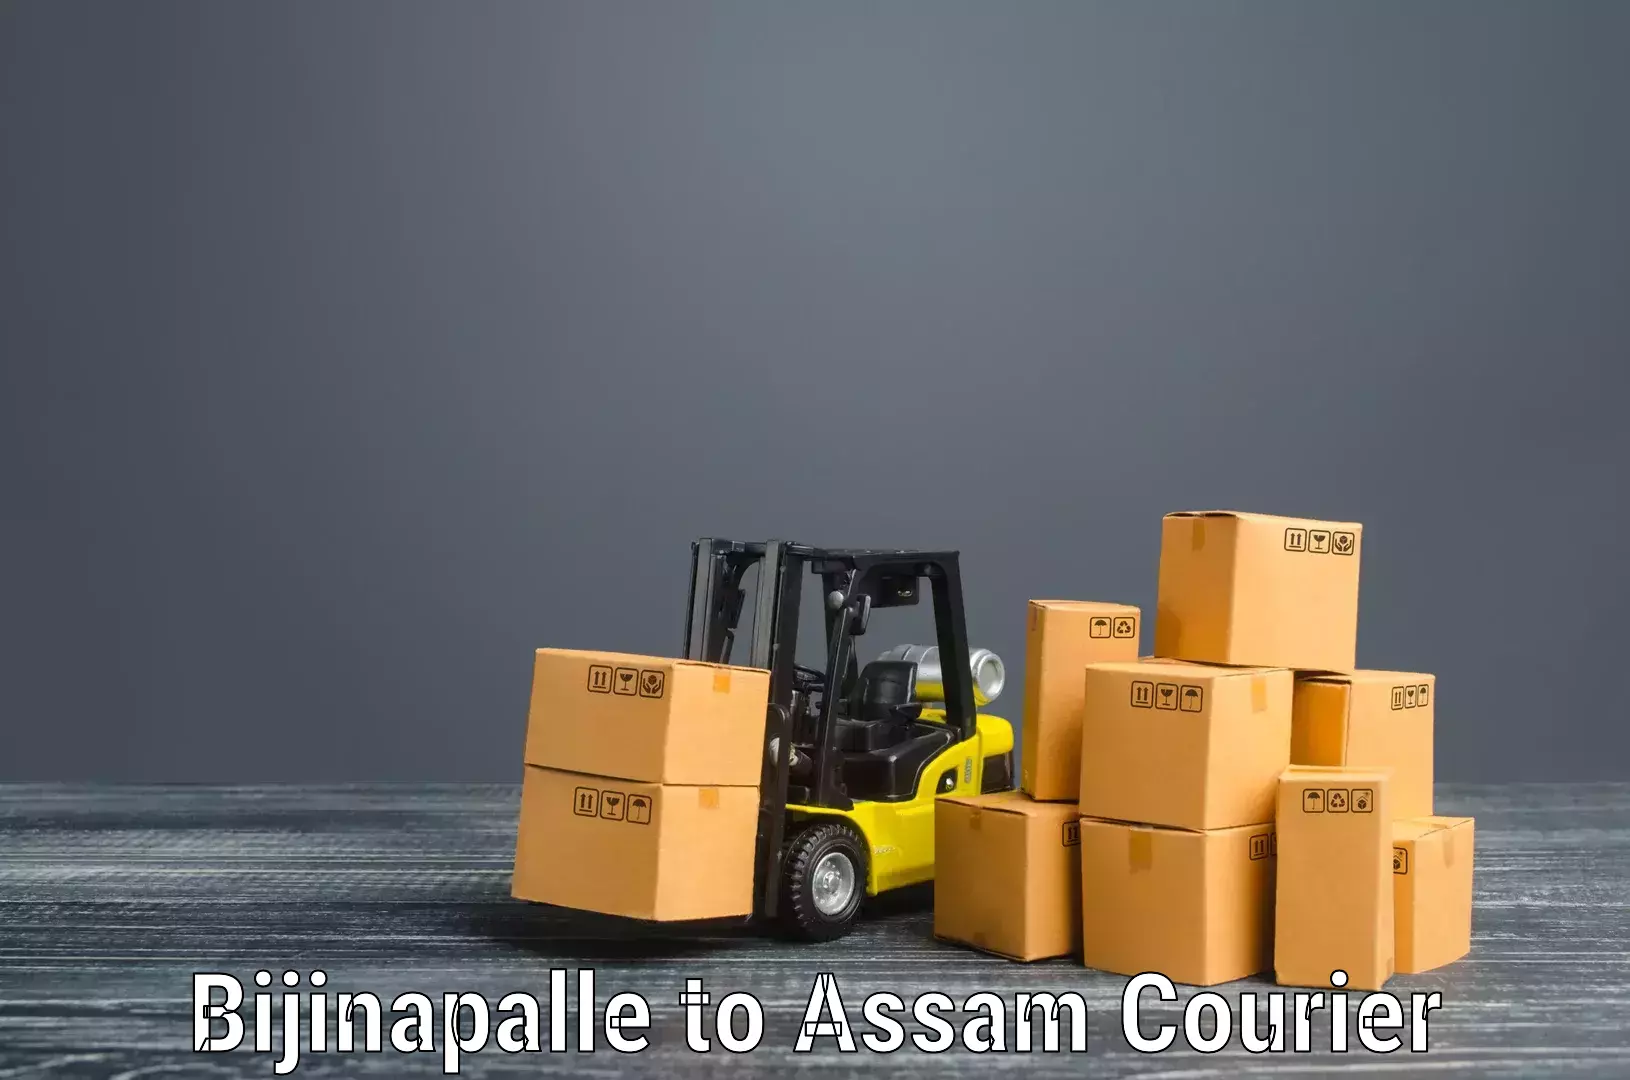 Furniture moving specialists Bijinapalle to Assam